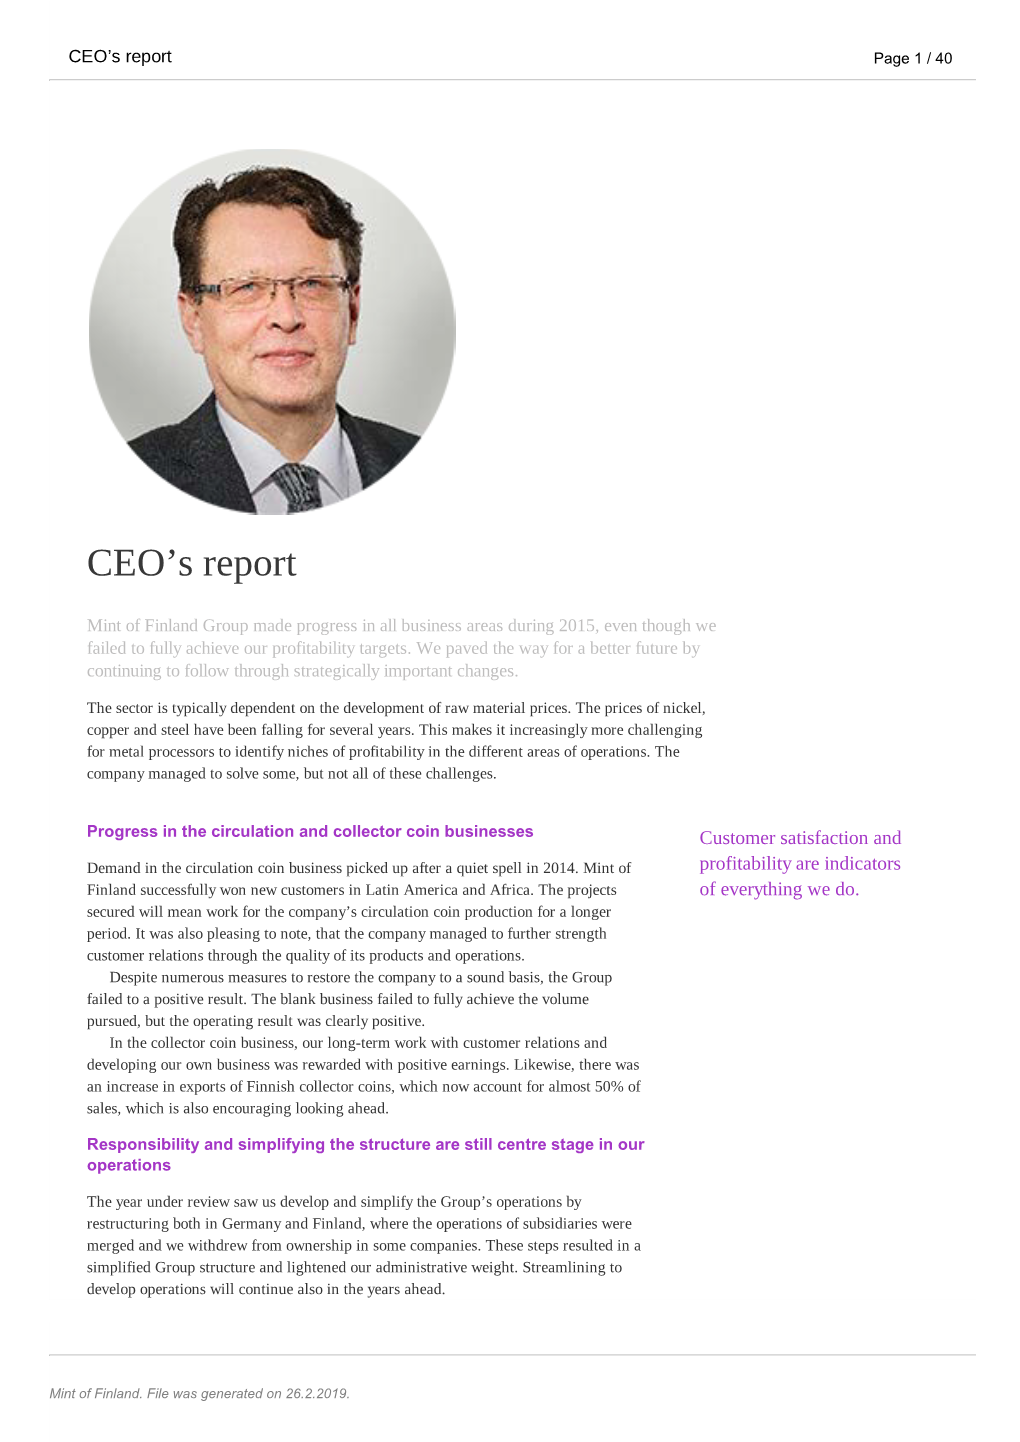 Mint of Finland Group's Annual Report 2015